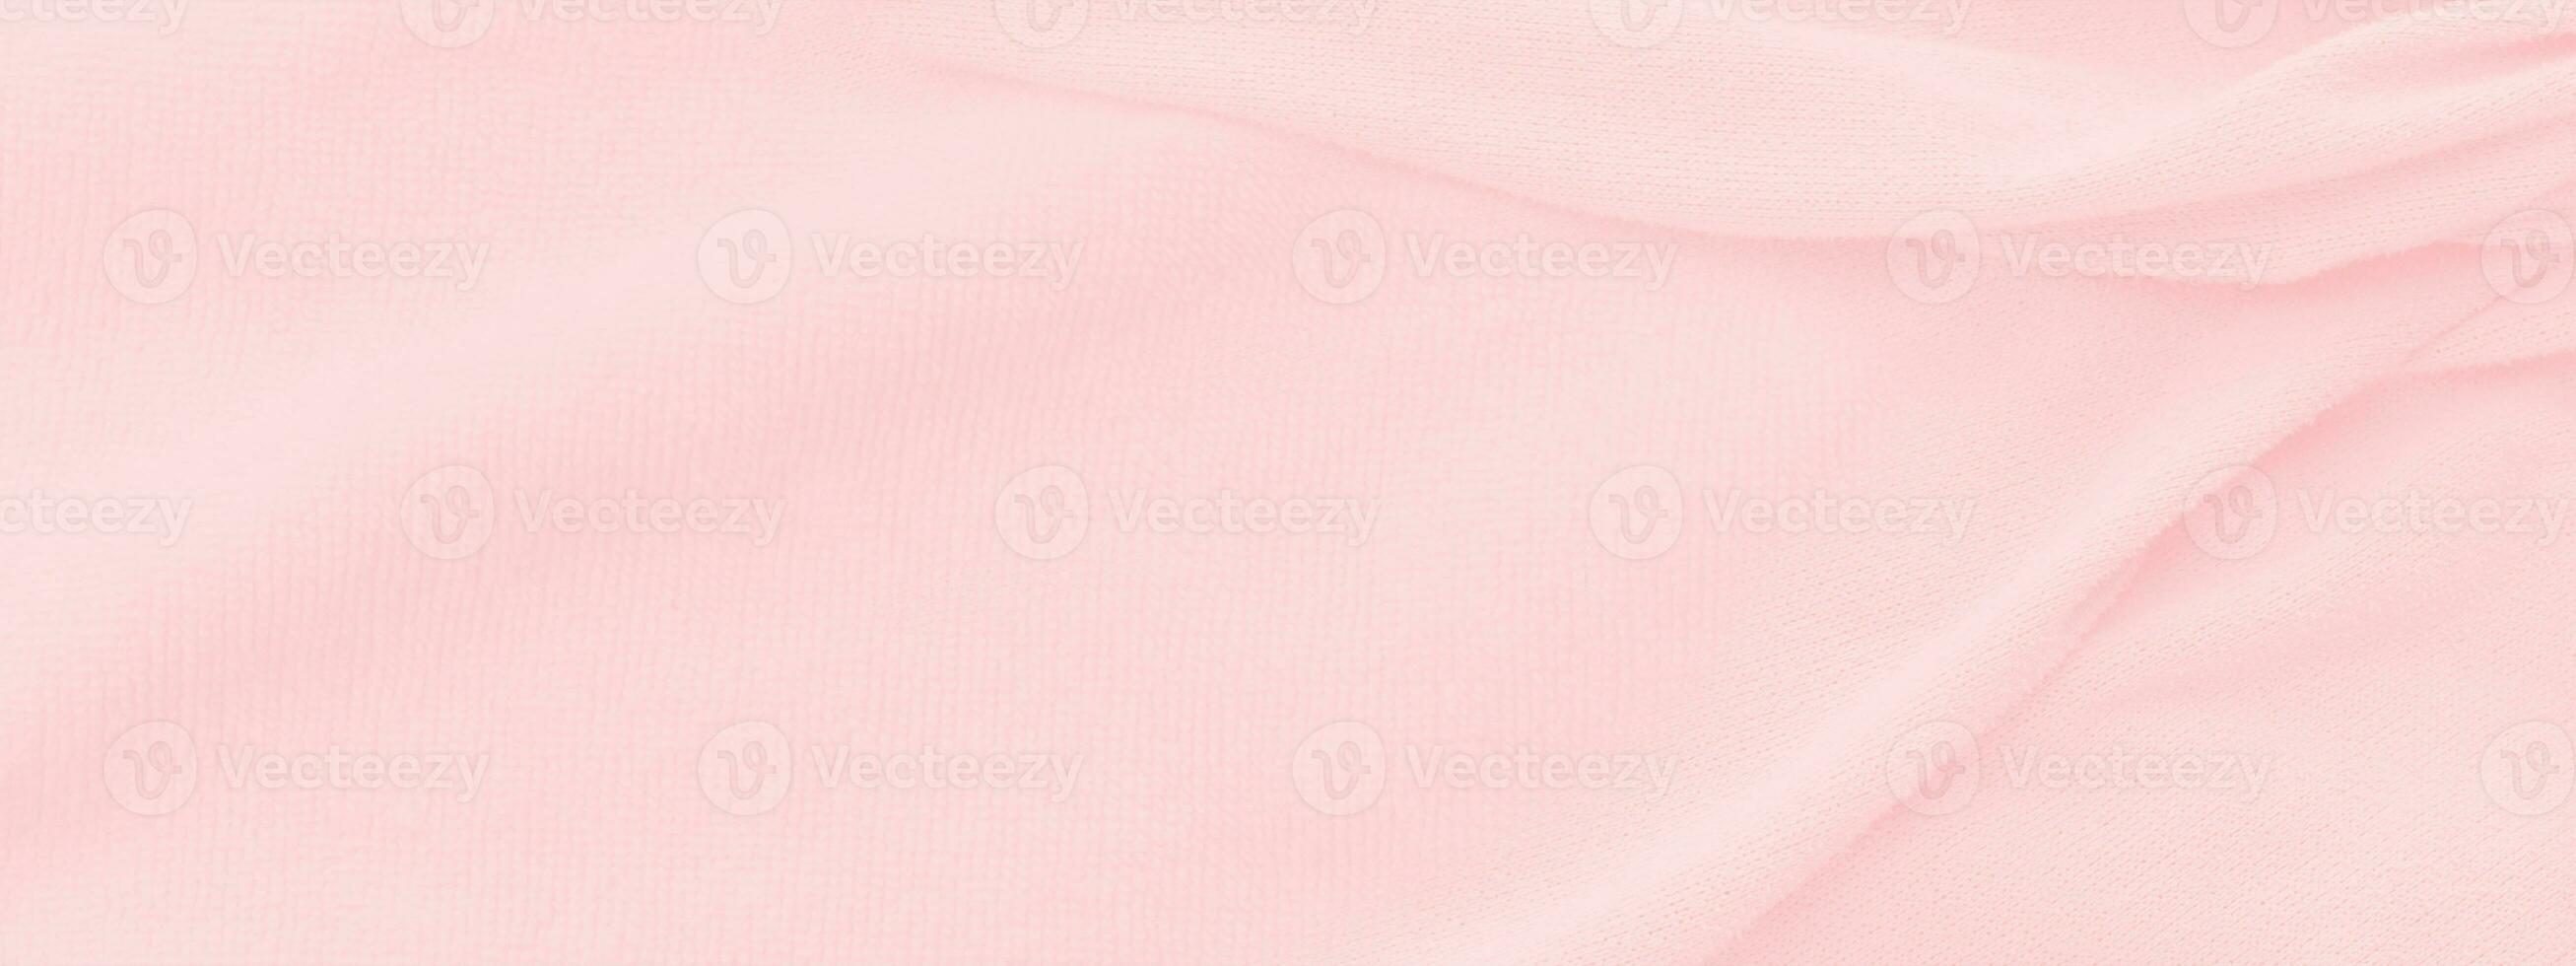 Abstract pink fabric texture background. panorama picture photo